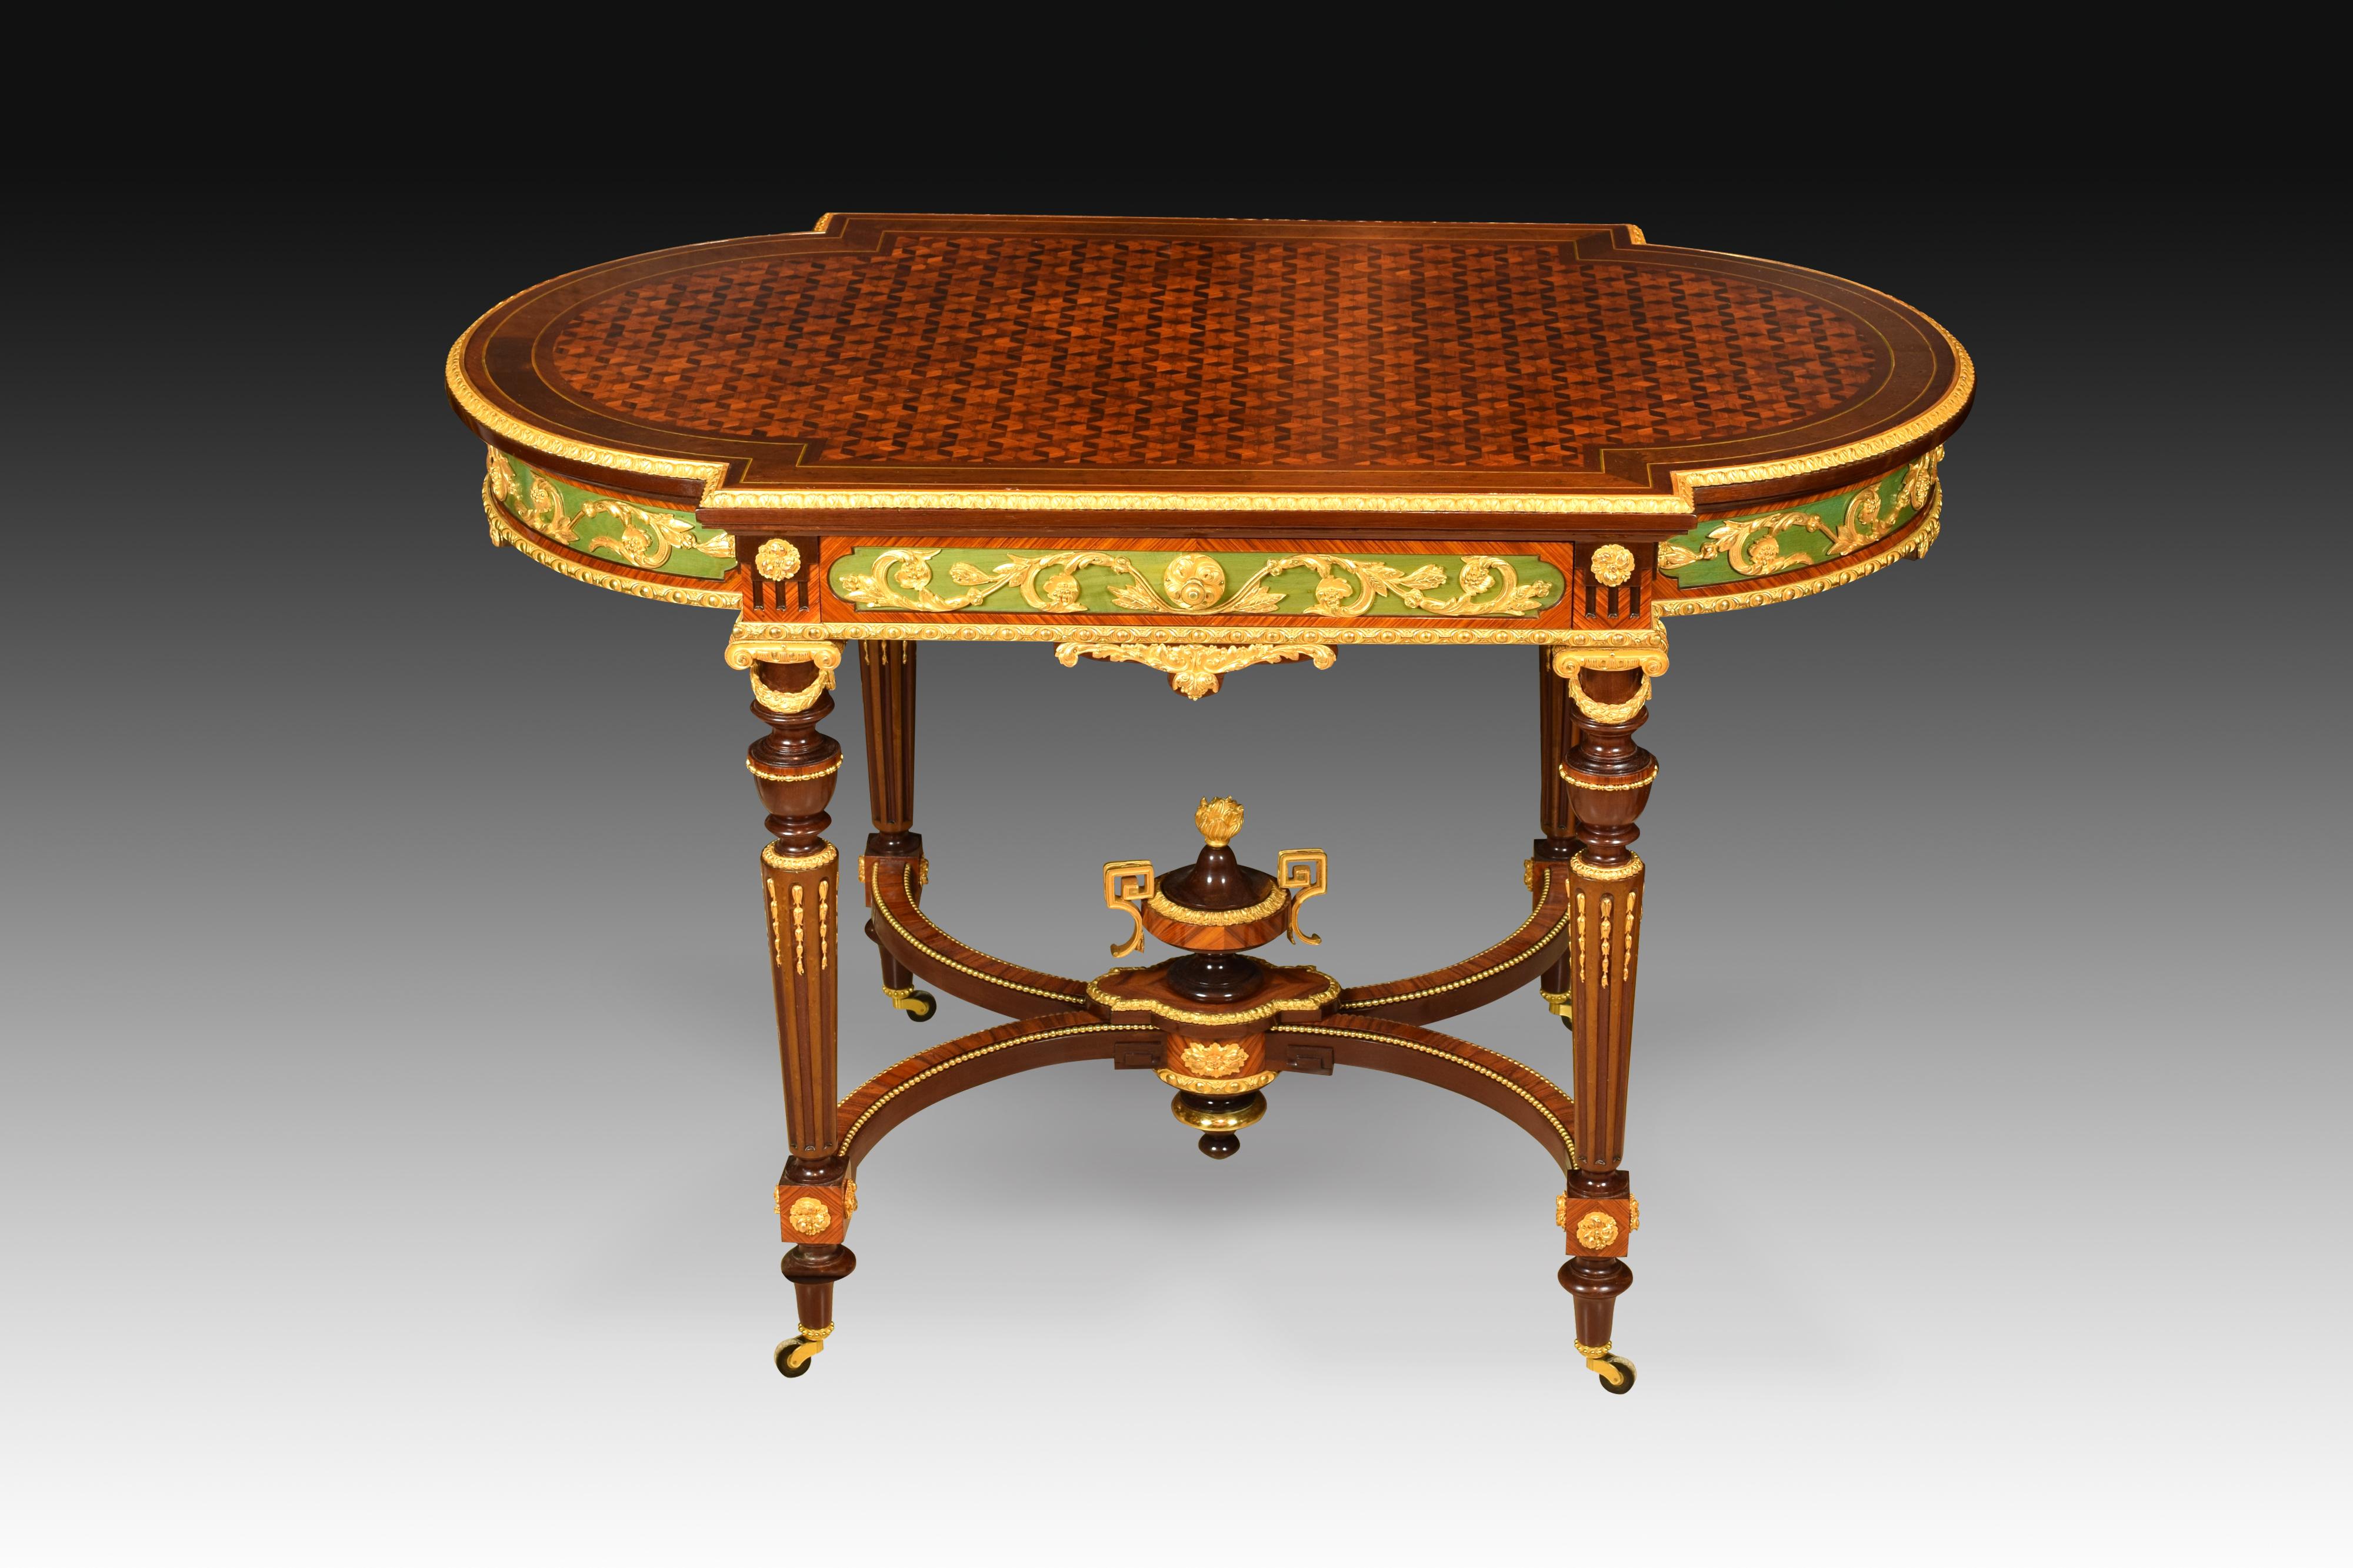 Louis XVI style table, France, 19th century. Plated lid. Mahogany, rosewood, gilded bronze. The legs, which maintain their respective sheaves, have a circular column shape starting from a die and ending in vase forms highlighted with garlands, fine